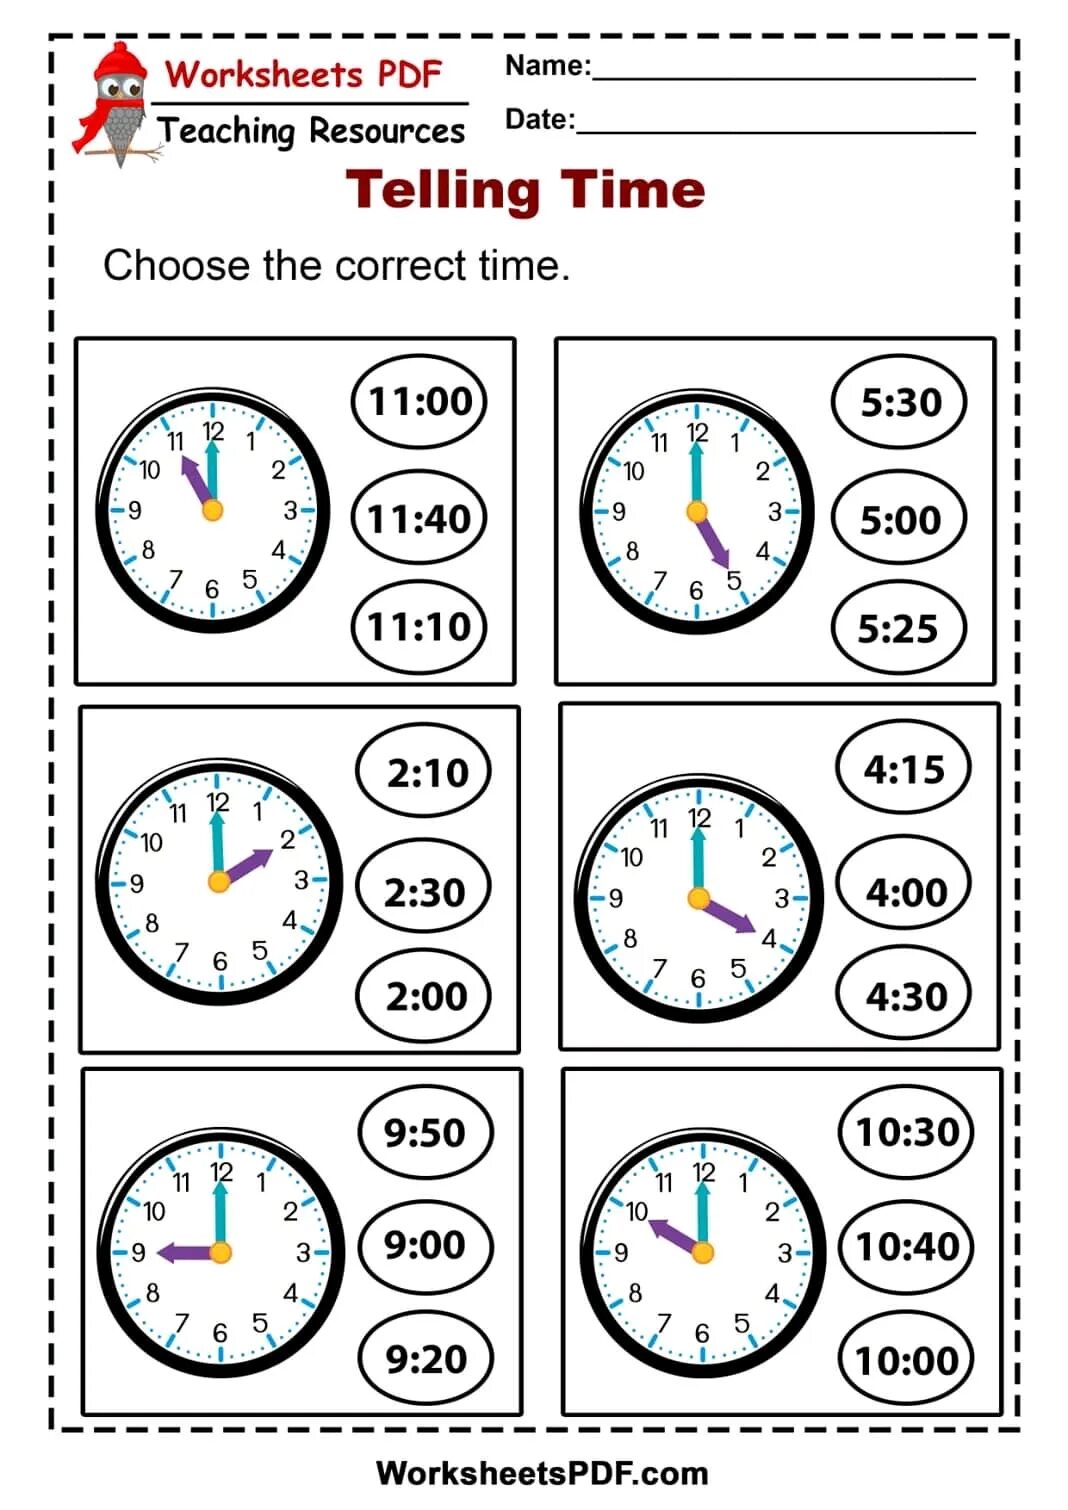 Telling the time worksheet. Telling the time английский язык Worksheet. Telling the time Worksheets. Telling the time 1 задание. Telling the time задания.